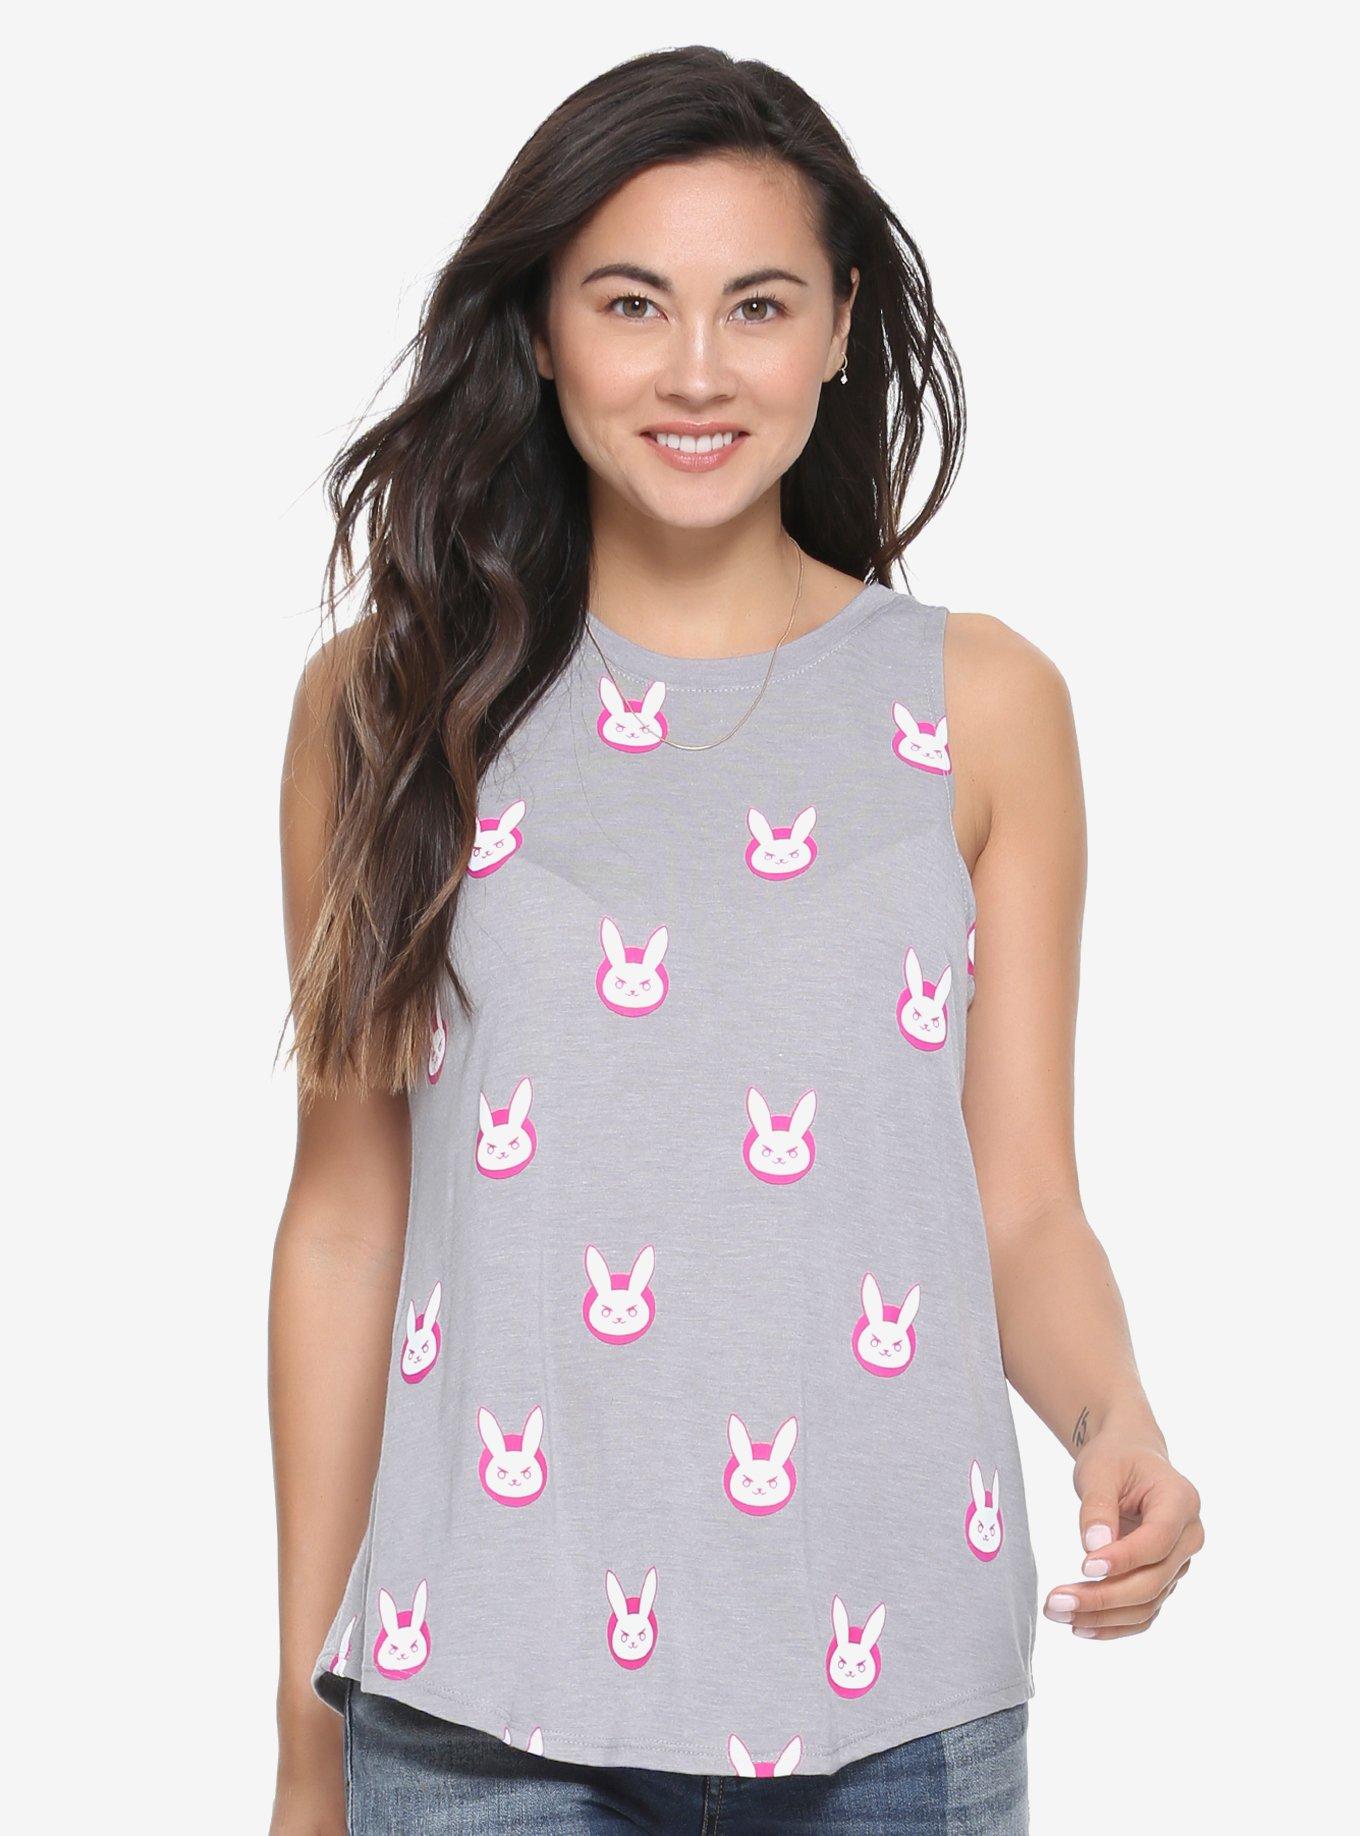 Overwatch D.Va Womens Fashion Tank Top - BoxLunch Exclusive, GREY, hi-res